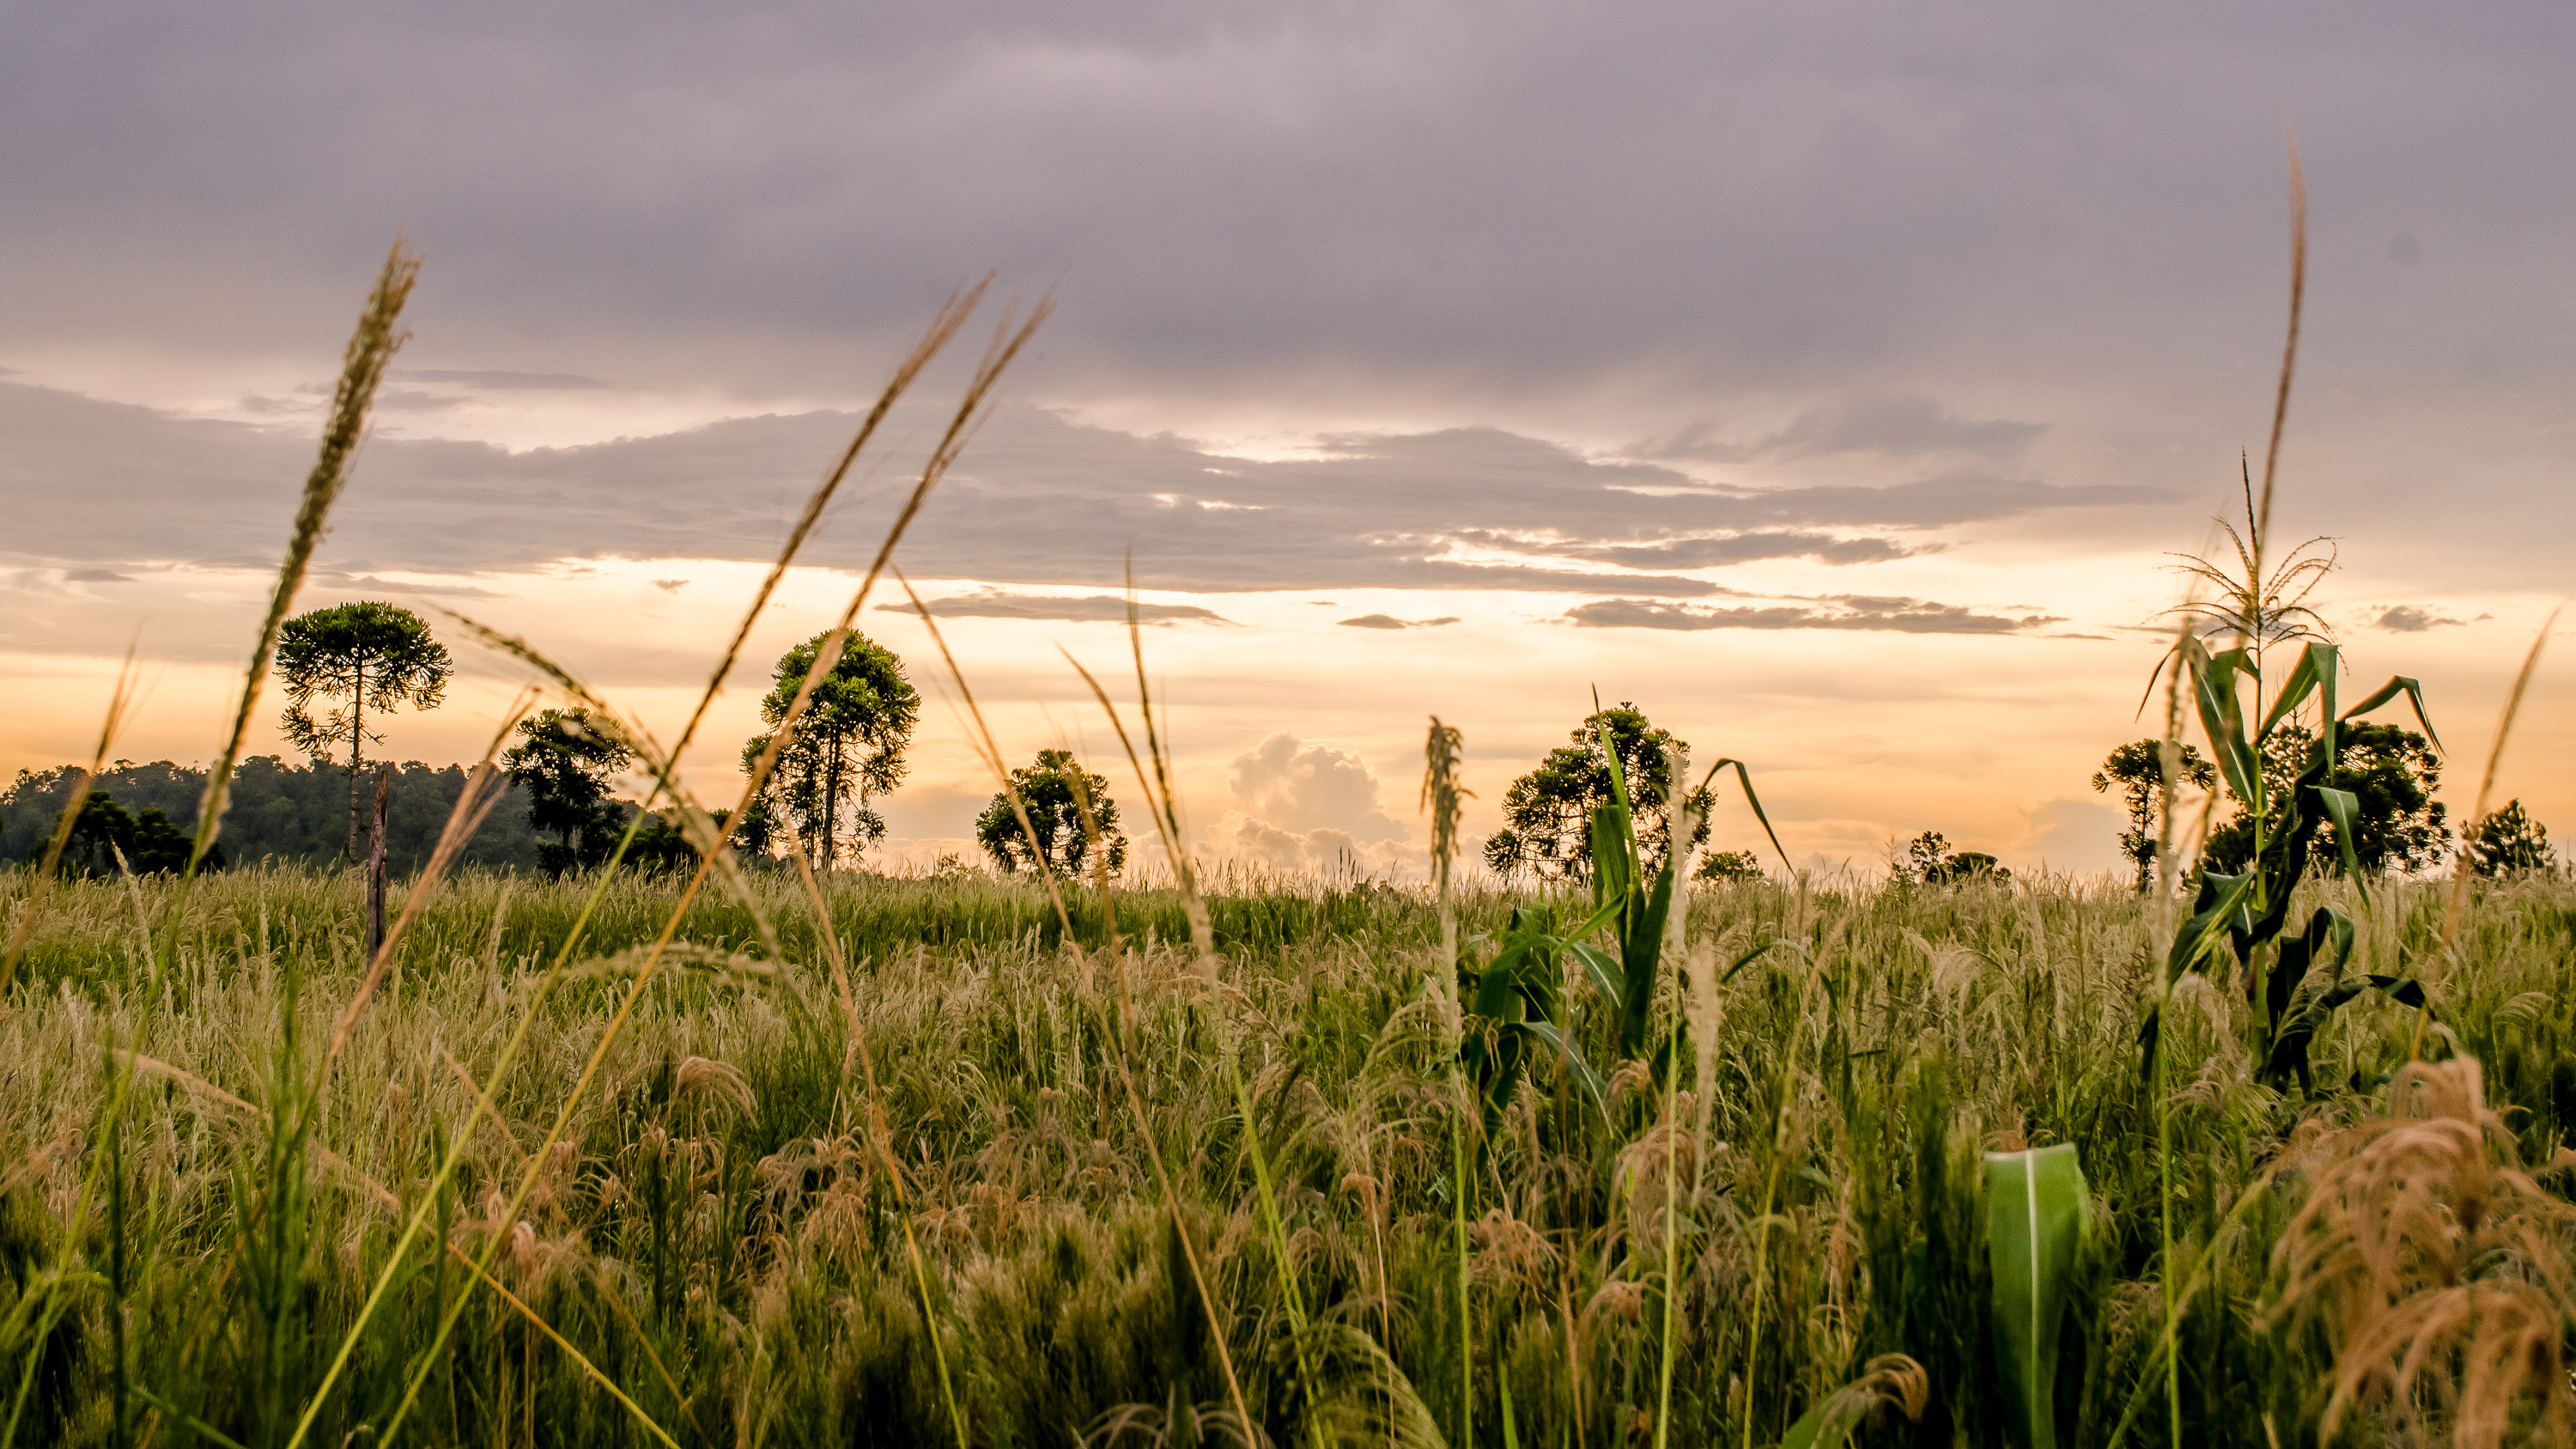 Grass Fields landscape in Argentina image - Free stock photo - Public ...